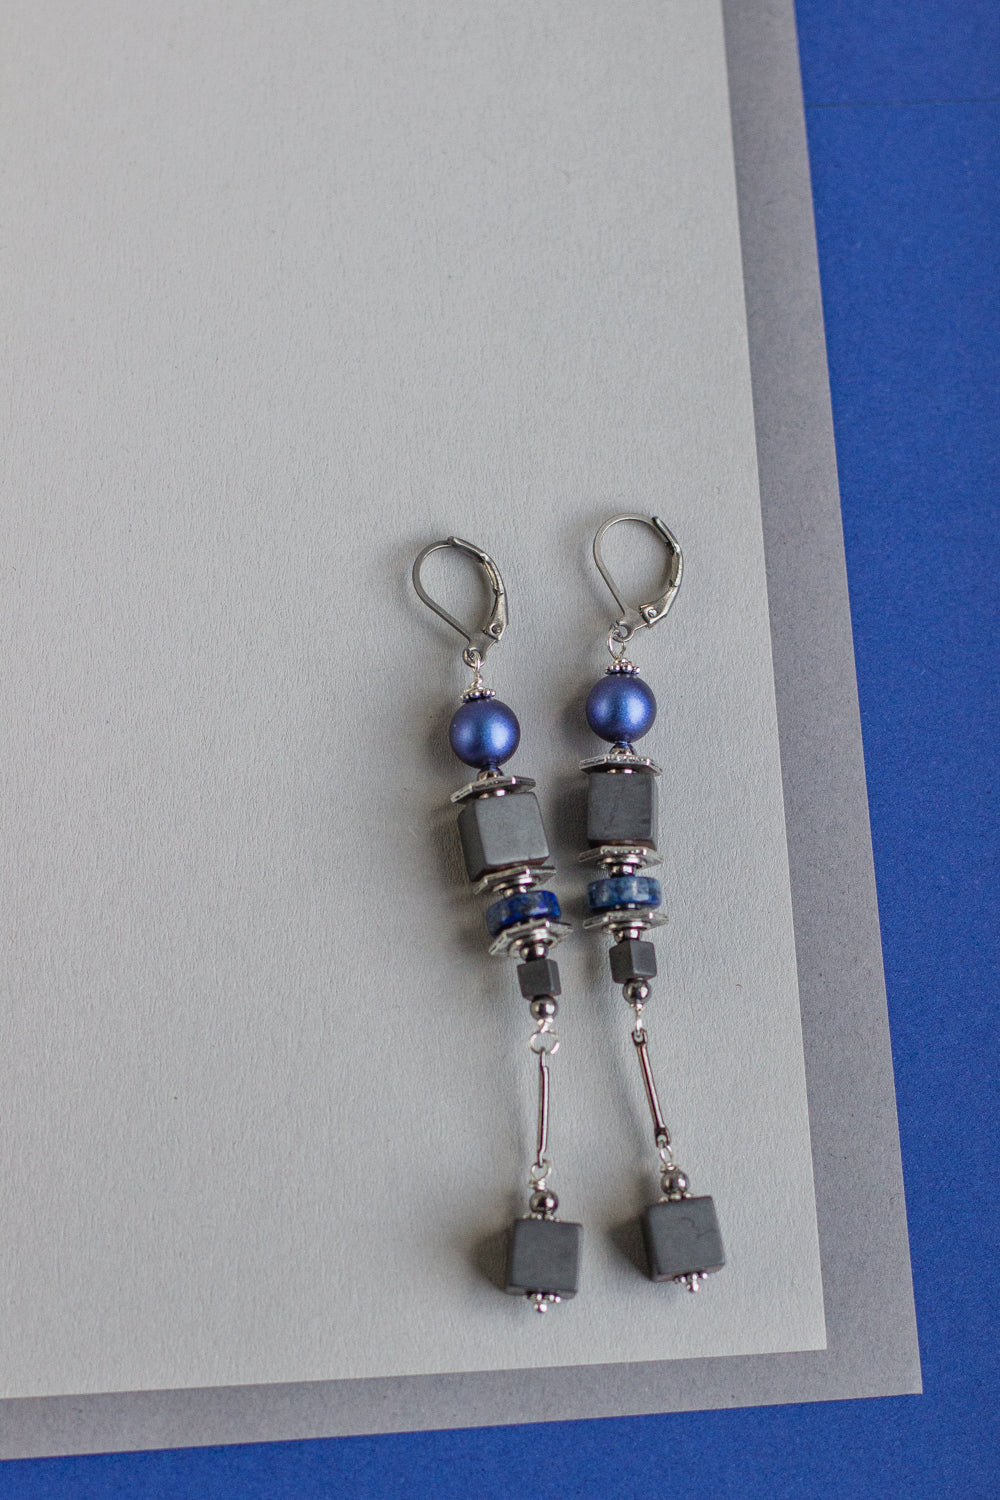 Shop for long royal blue, gray, and silver Swarovski pearl earrings. Dangle drop earrings. Handmade fashion accessories that are unique. Geometric jewelry